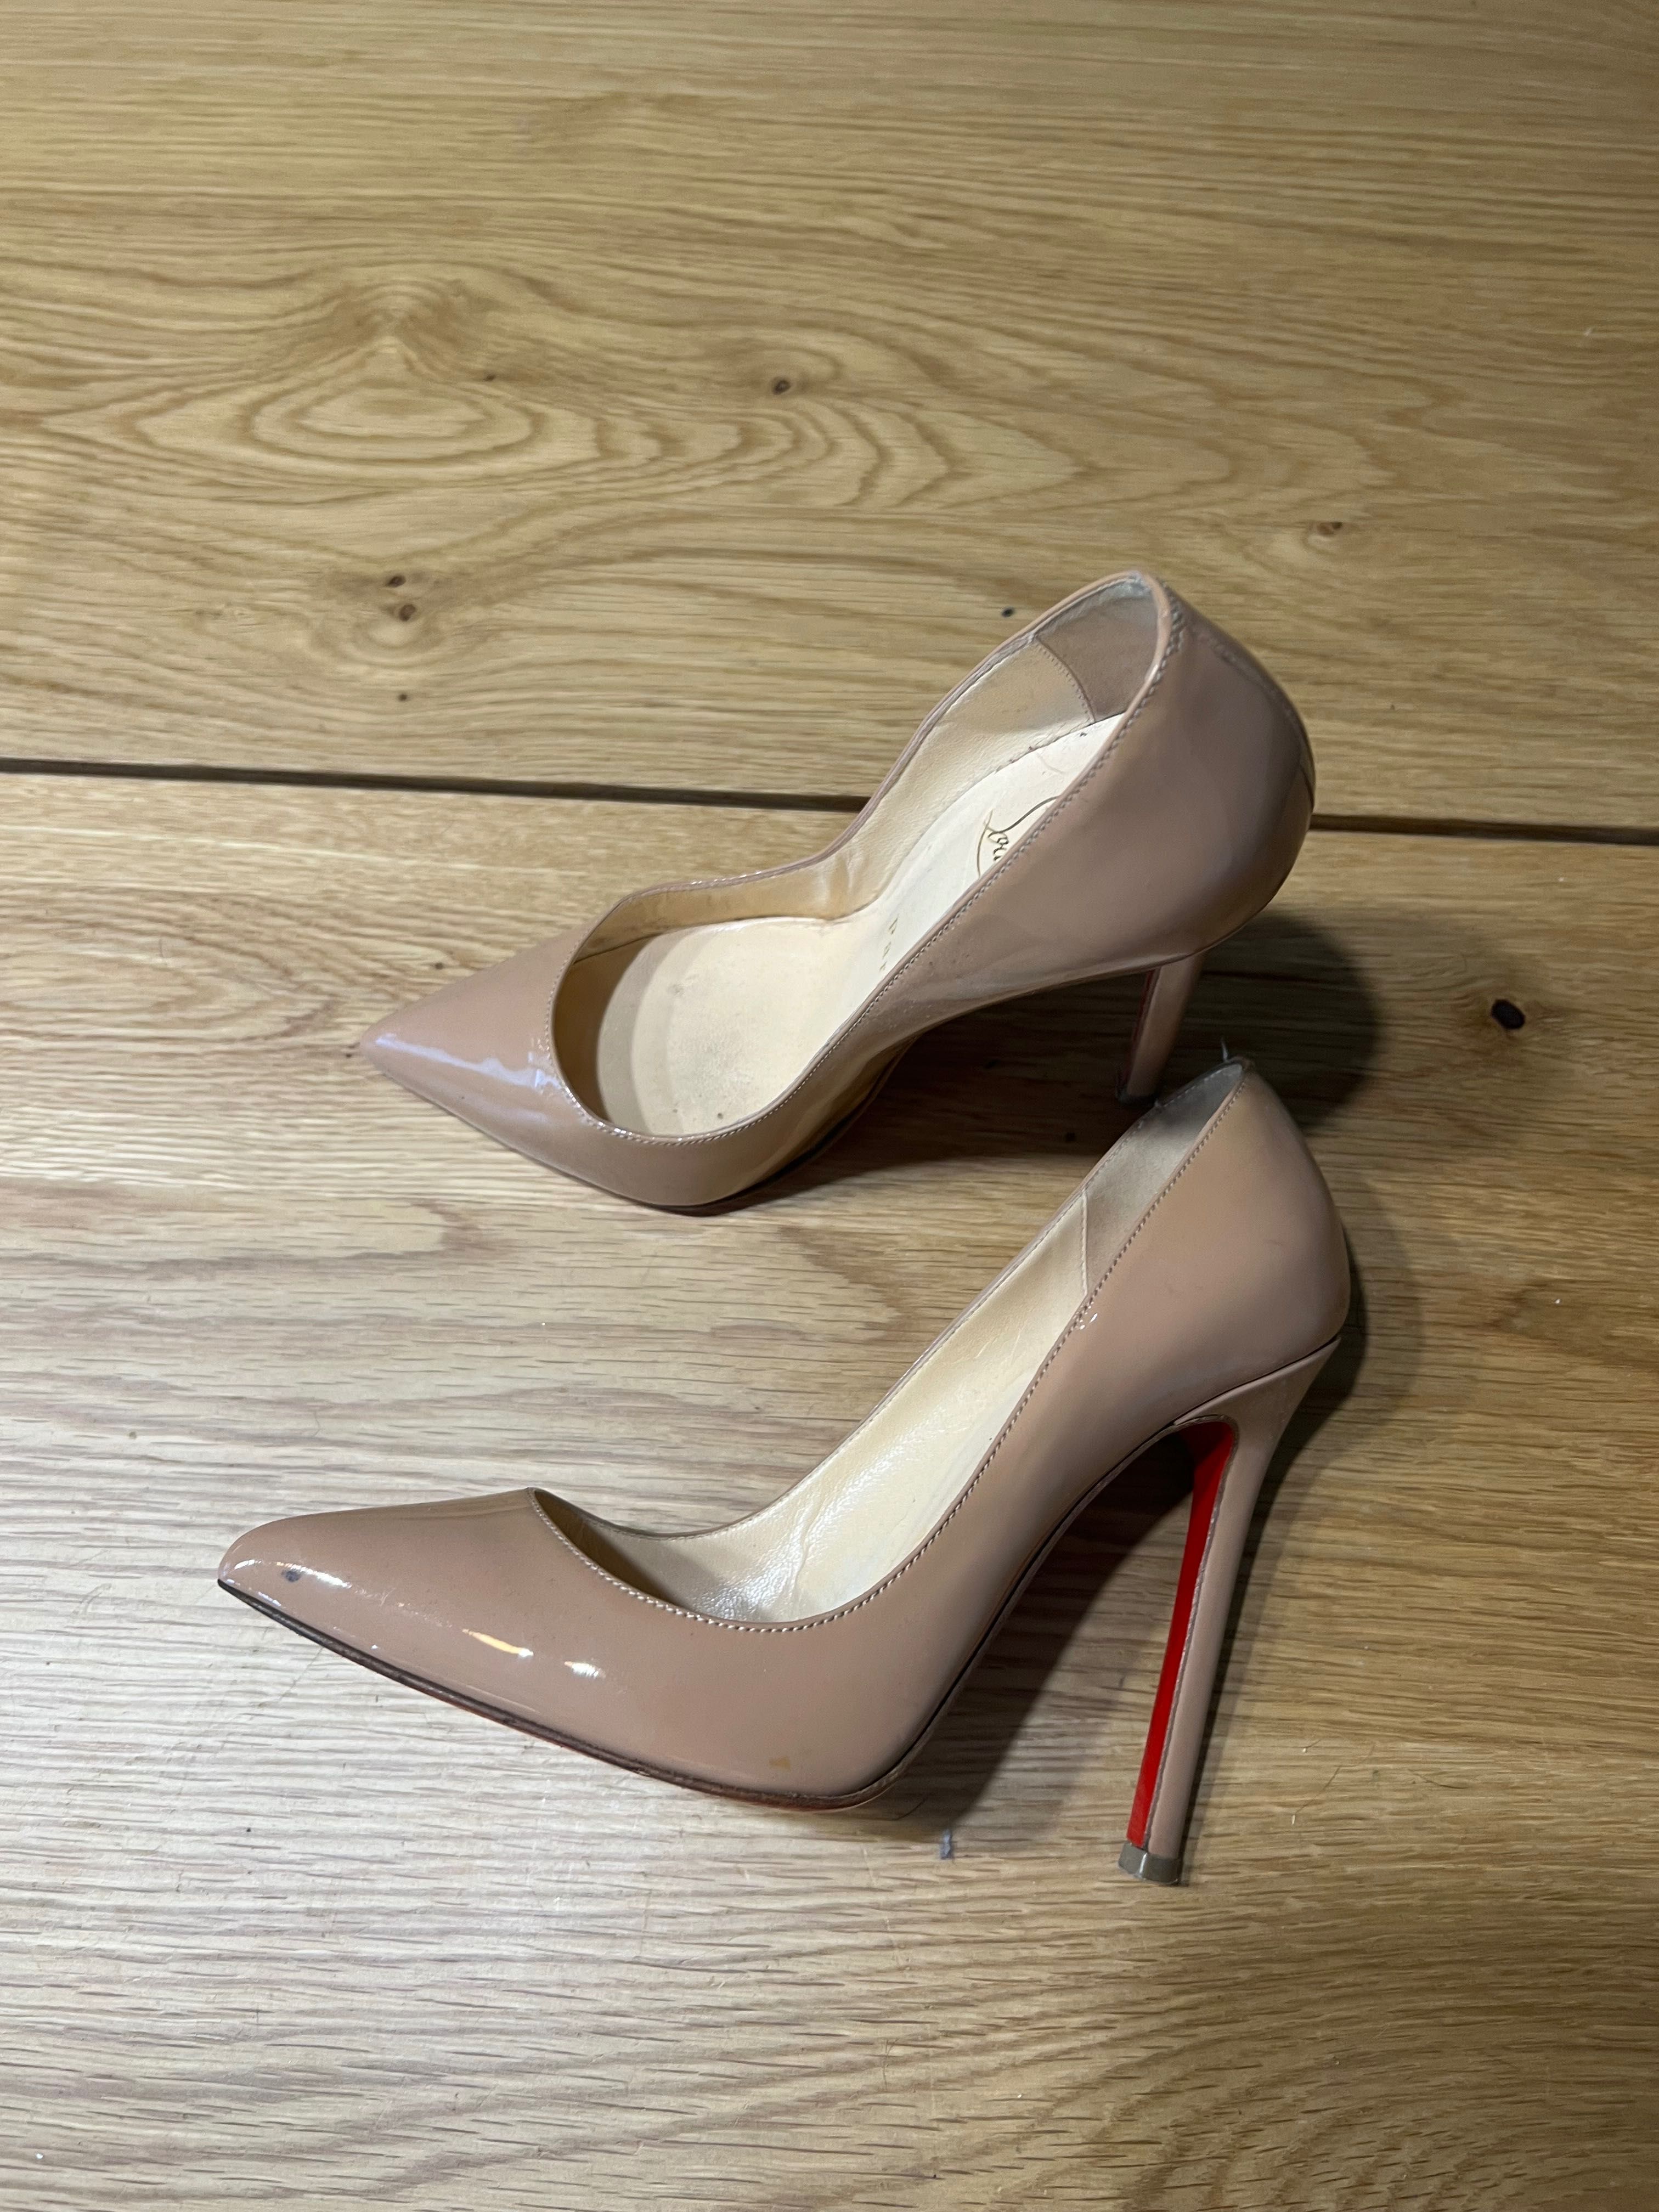 Christian Louboutin Pigalle 120 mm Patent Leather - Size 34.5